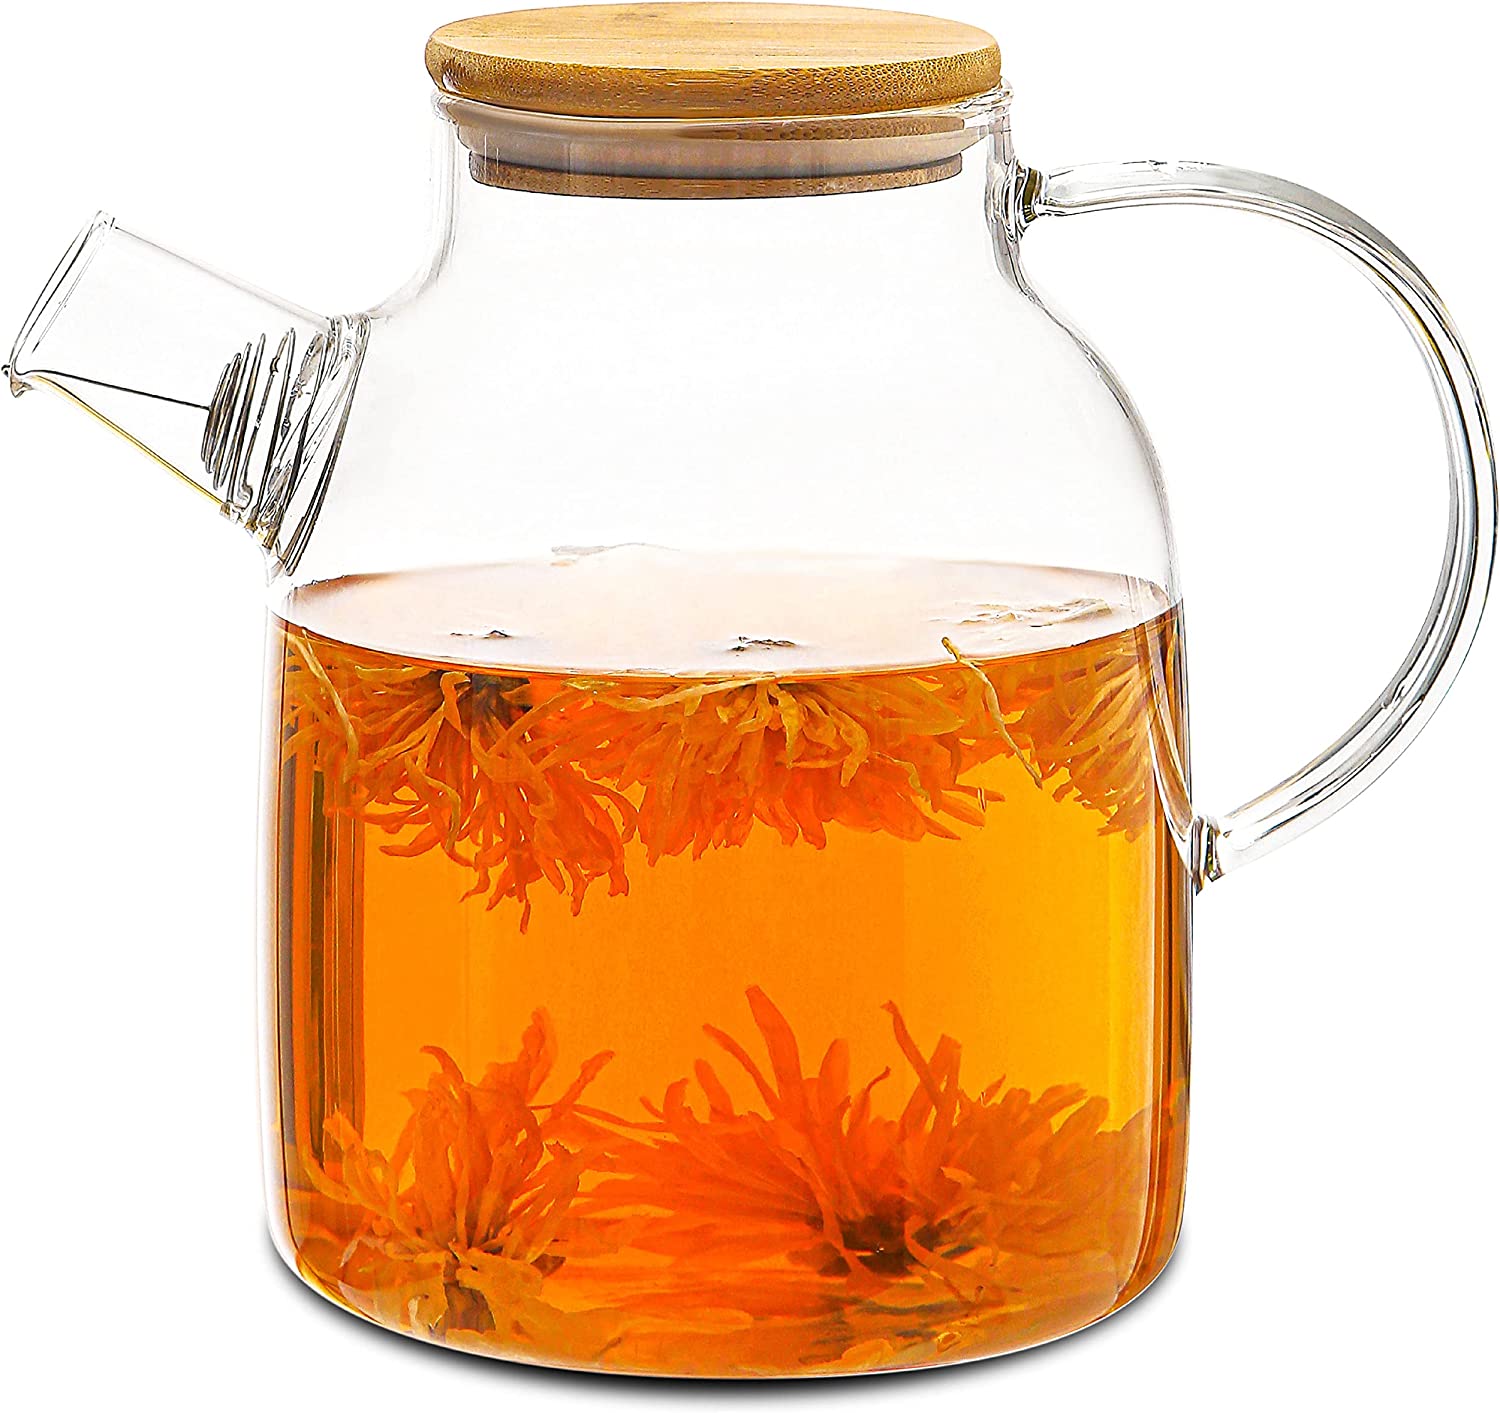 Cosumy Glass Teapot 1.5 Litres with Bamboo Lid - Filter in Spout - For Hot and Cold Drinks - Dishwasher Safe